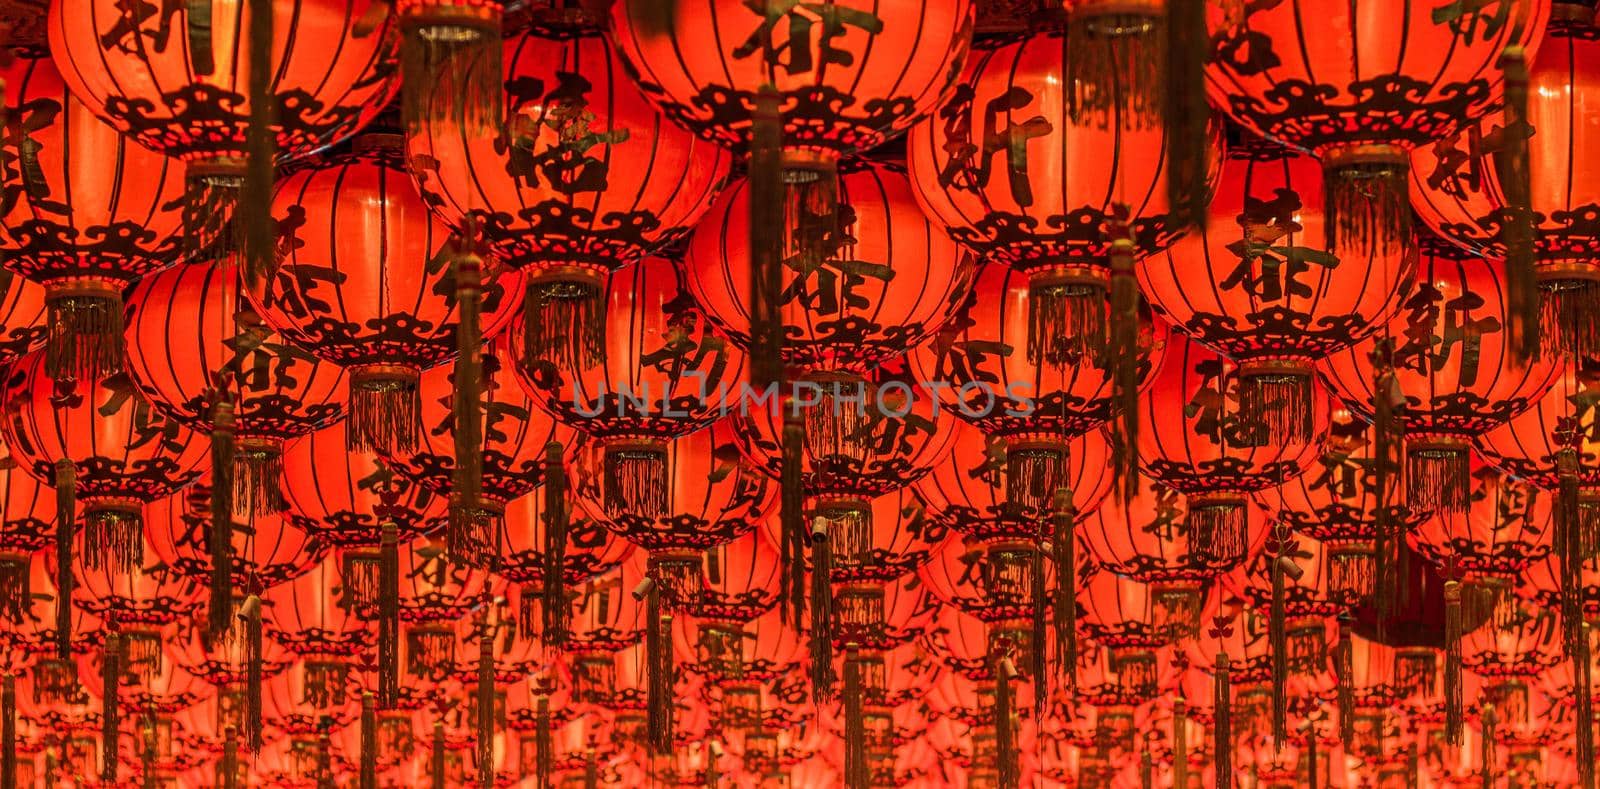 Chinese red lanterns hanging in street at night for decoration. Chinese letter written mean good luck. by Petrichor